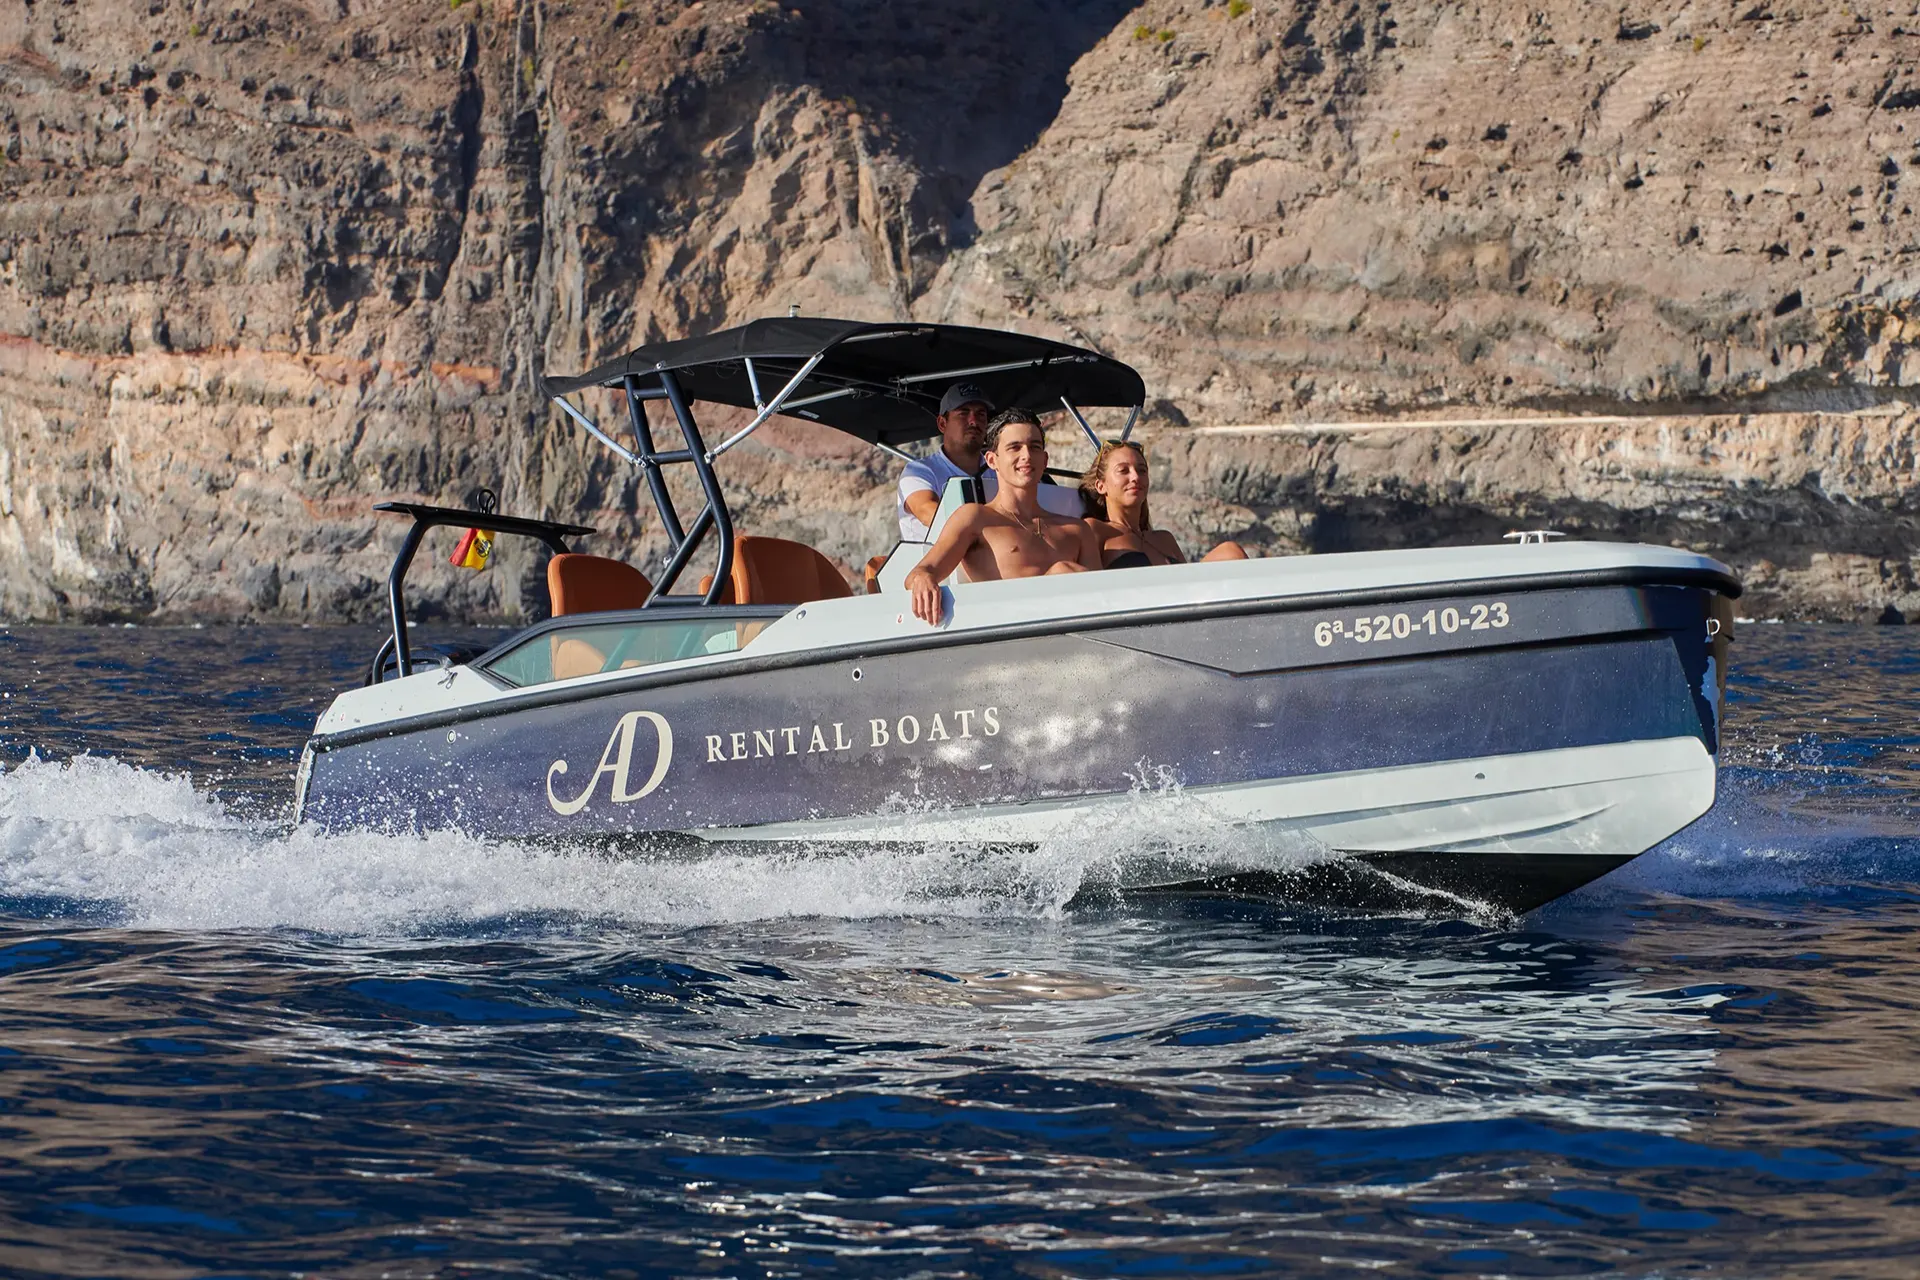 Couple with a skipper on a boat in the sea south of Tenerife's Los Gigantes cliffs